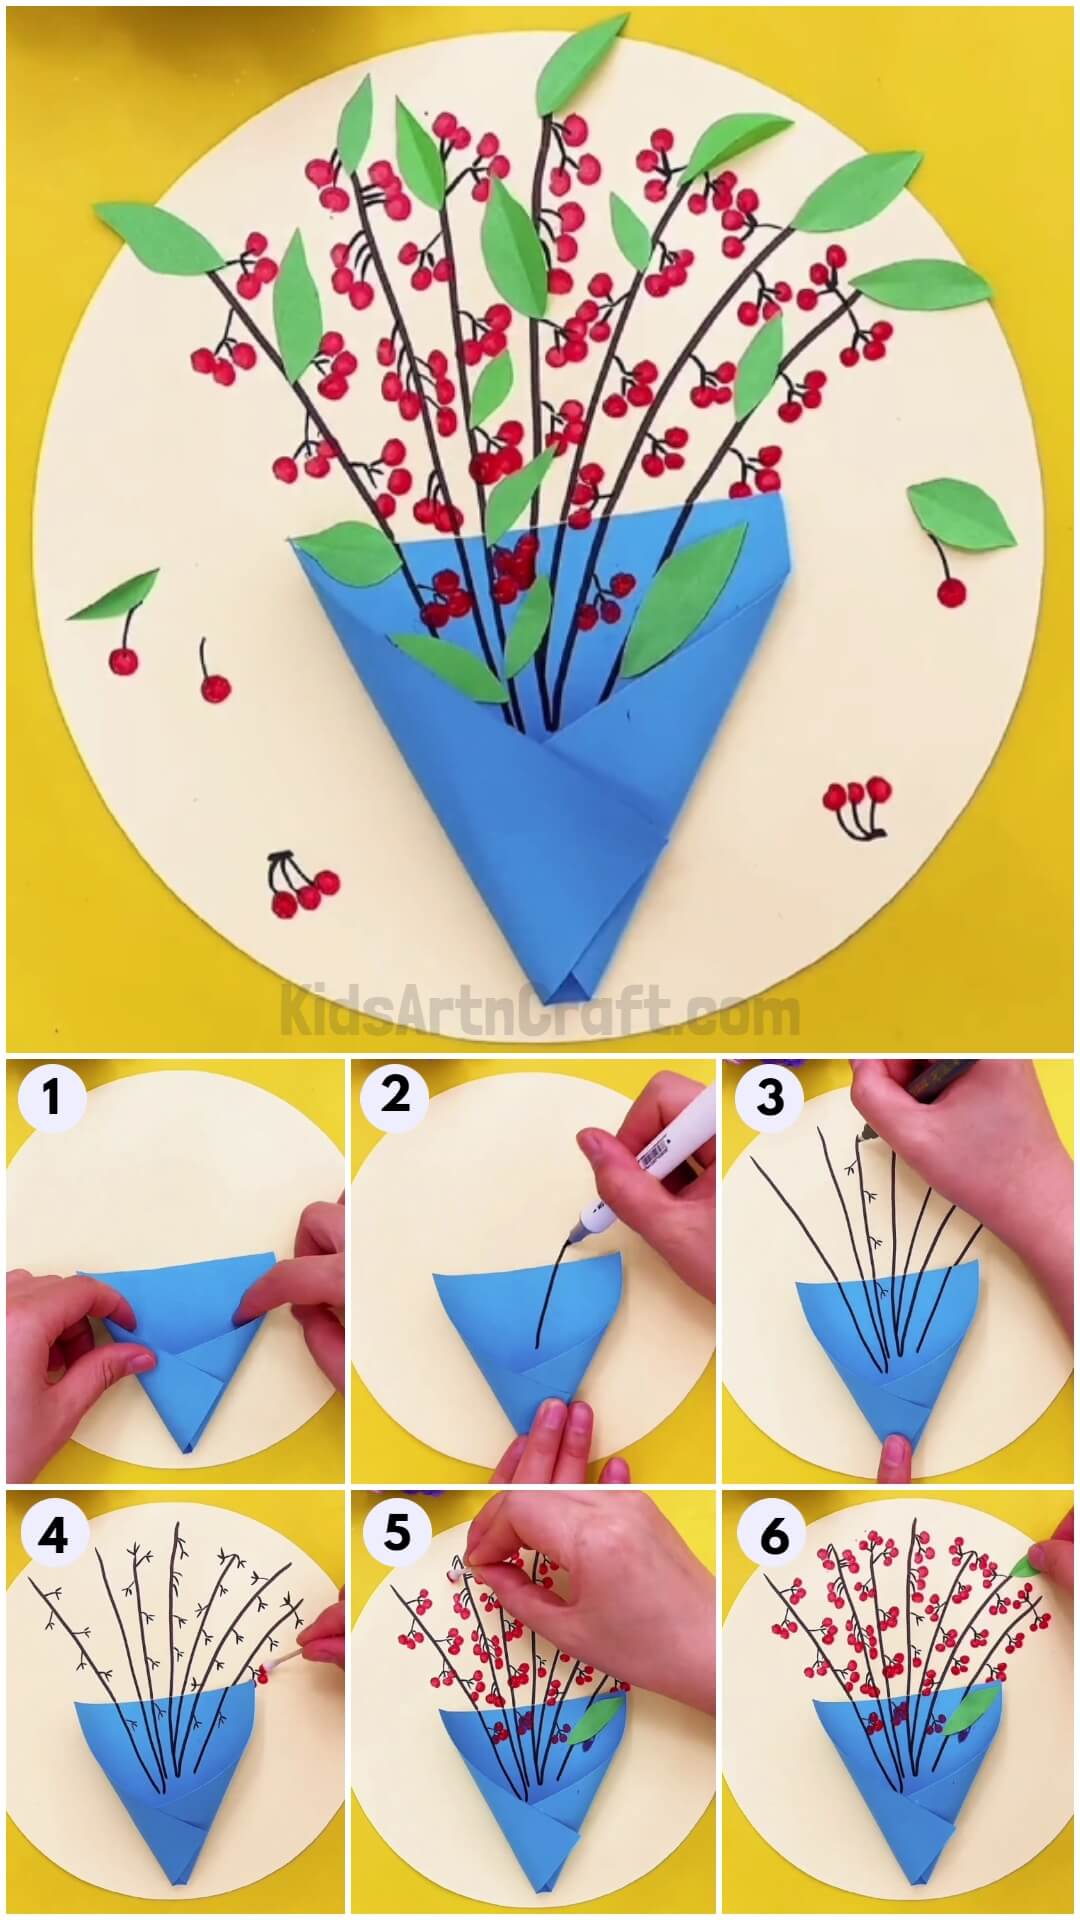 Tiny Red Flowers Bouquet Artwork Craft Idea For Kids